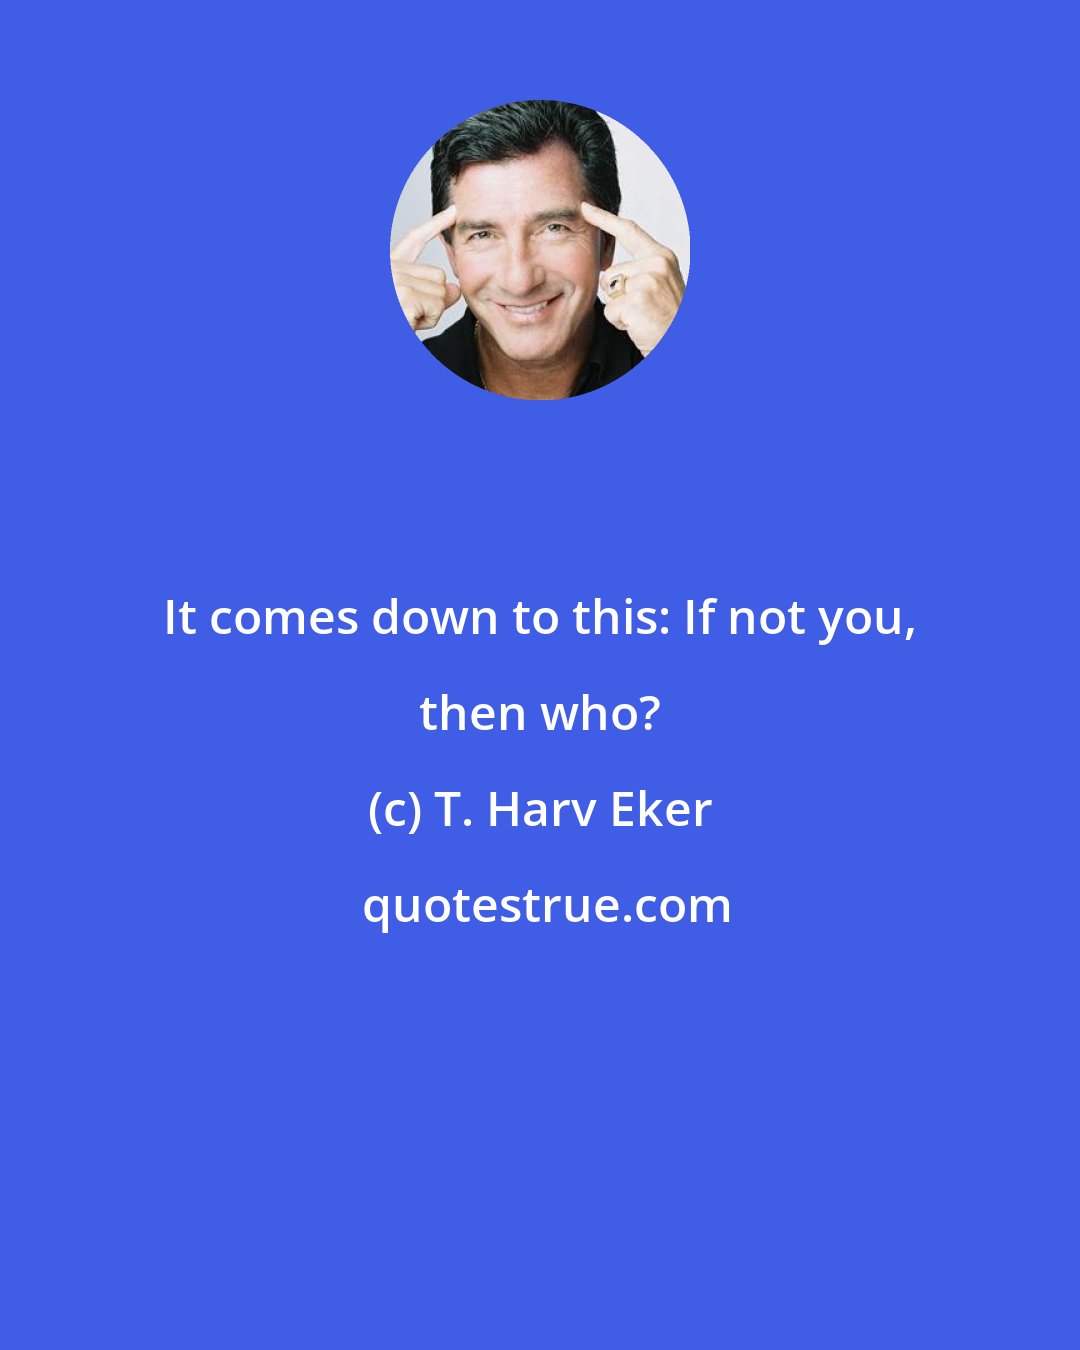 T. Harv Eker: It comes down to this: If not you, then who?